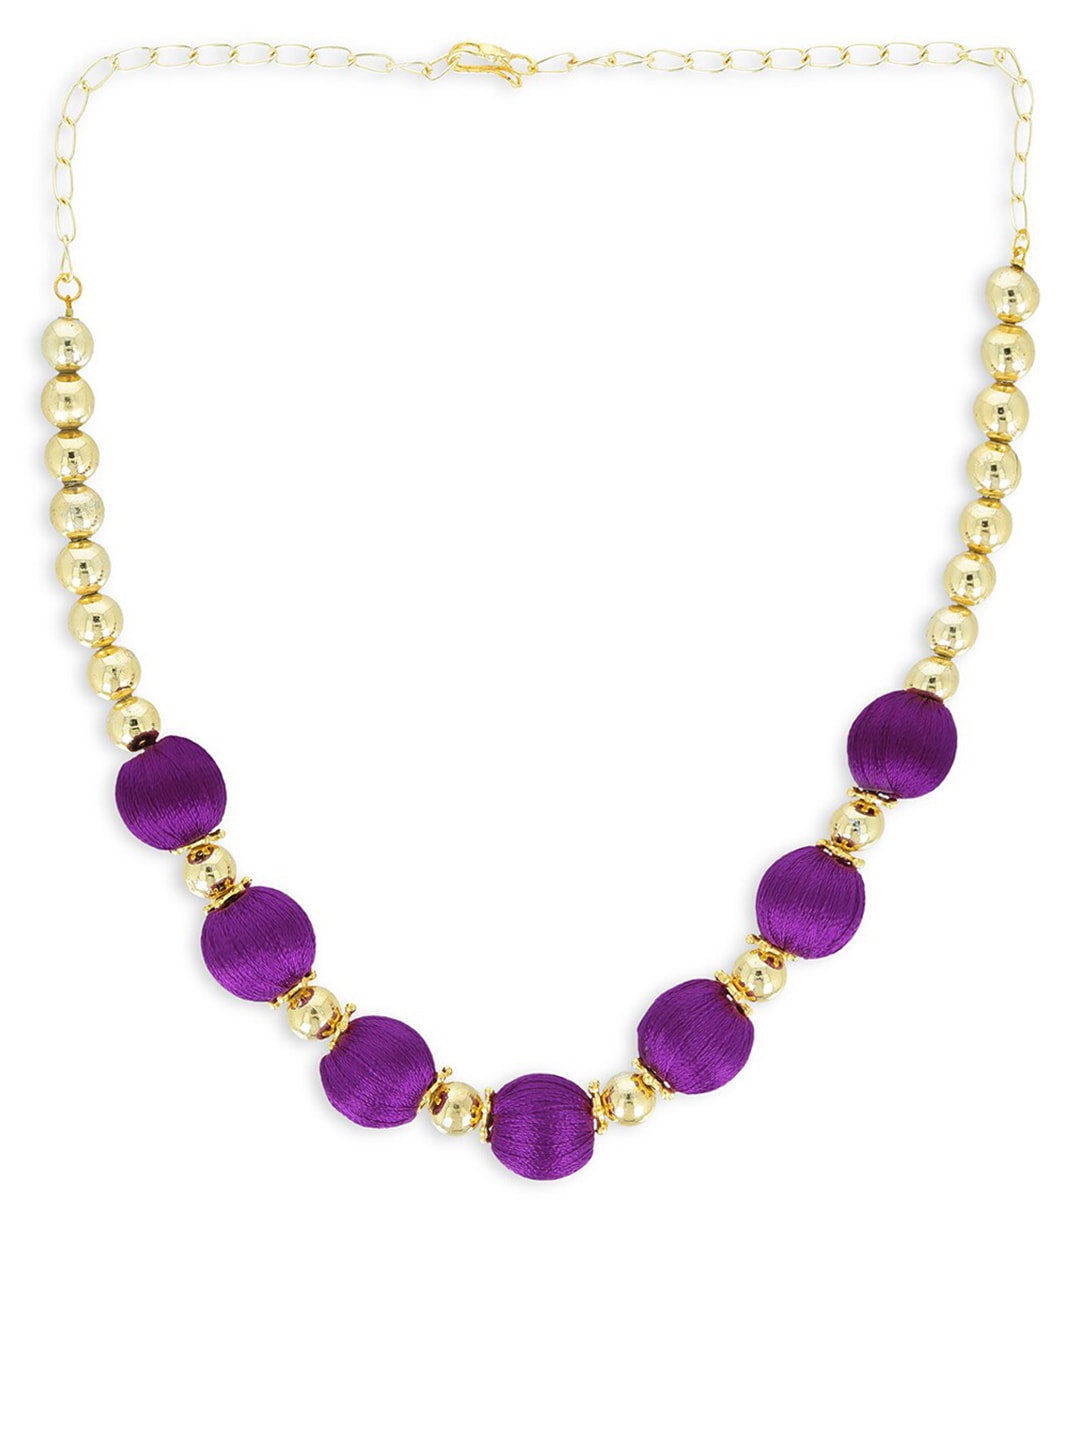 AKSHARA Purple & Gold-Toned Handcrafted Necklace Price in India